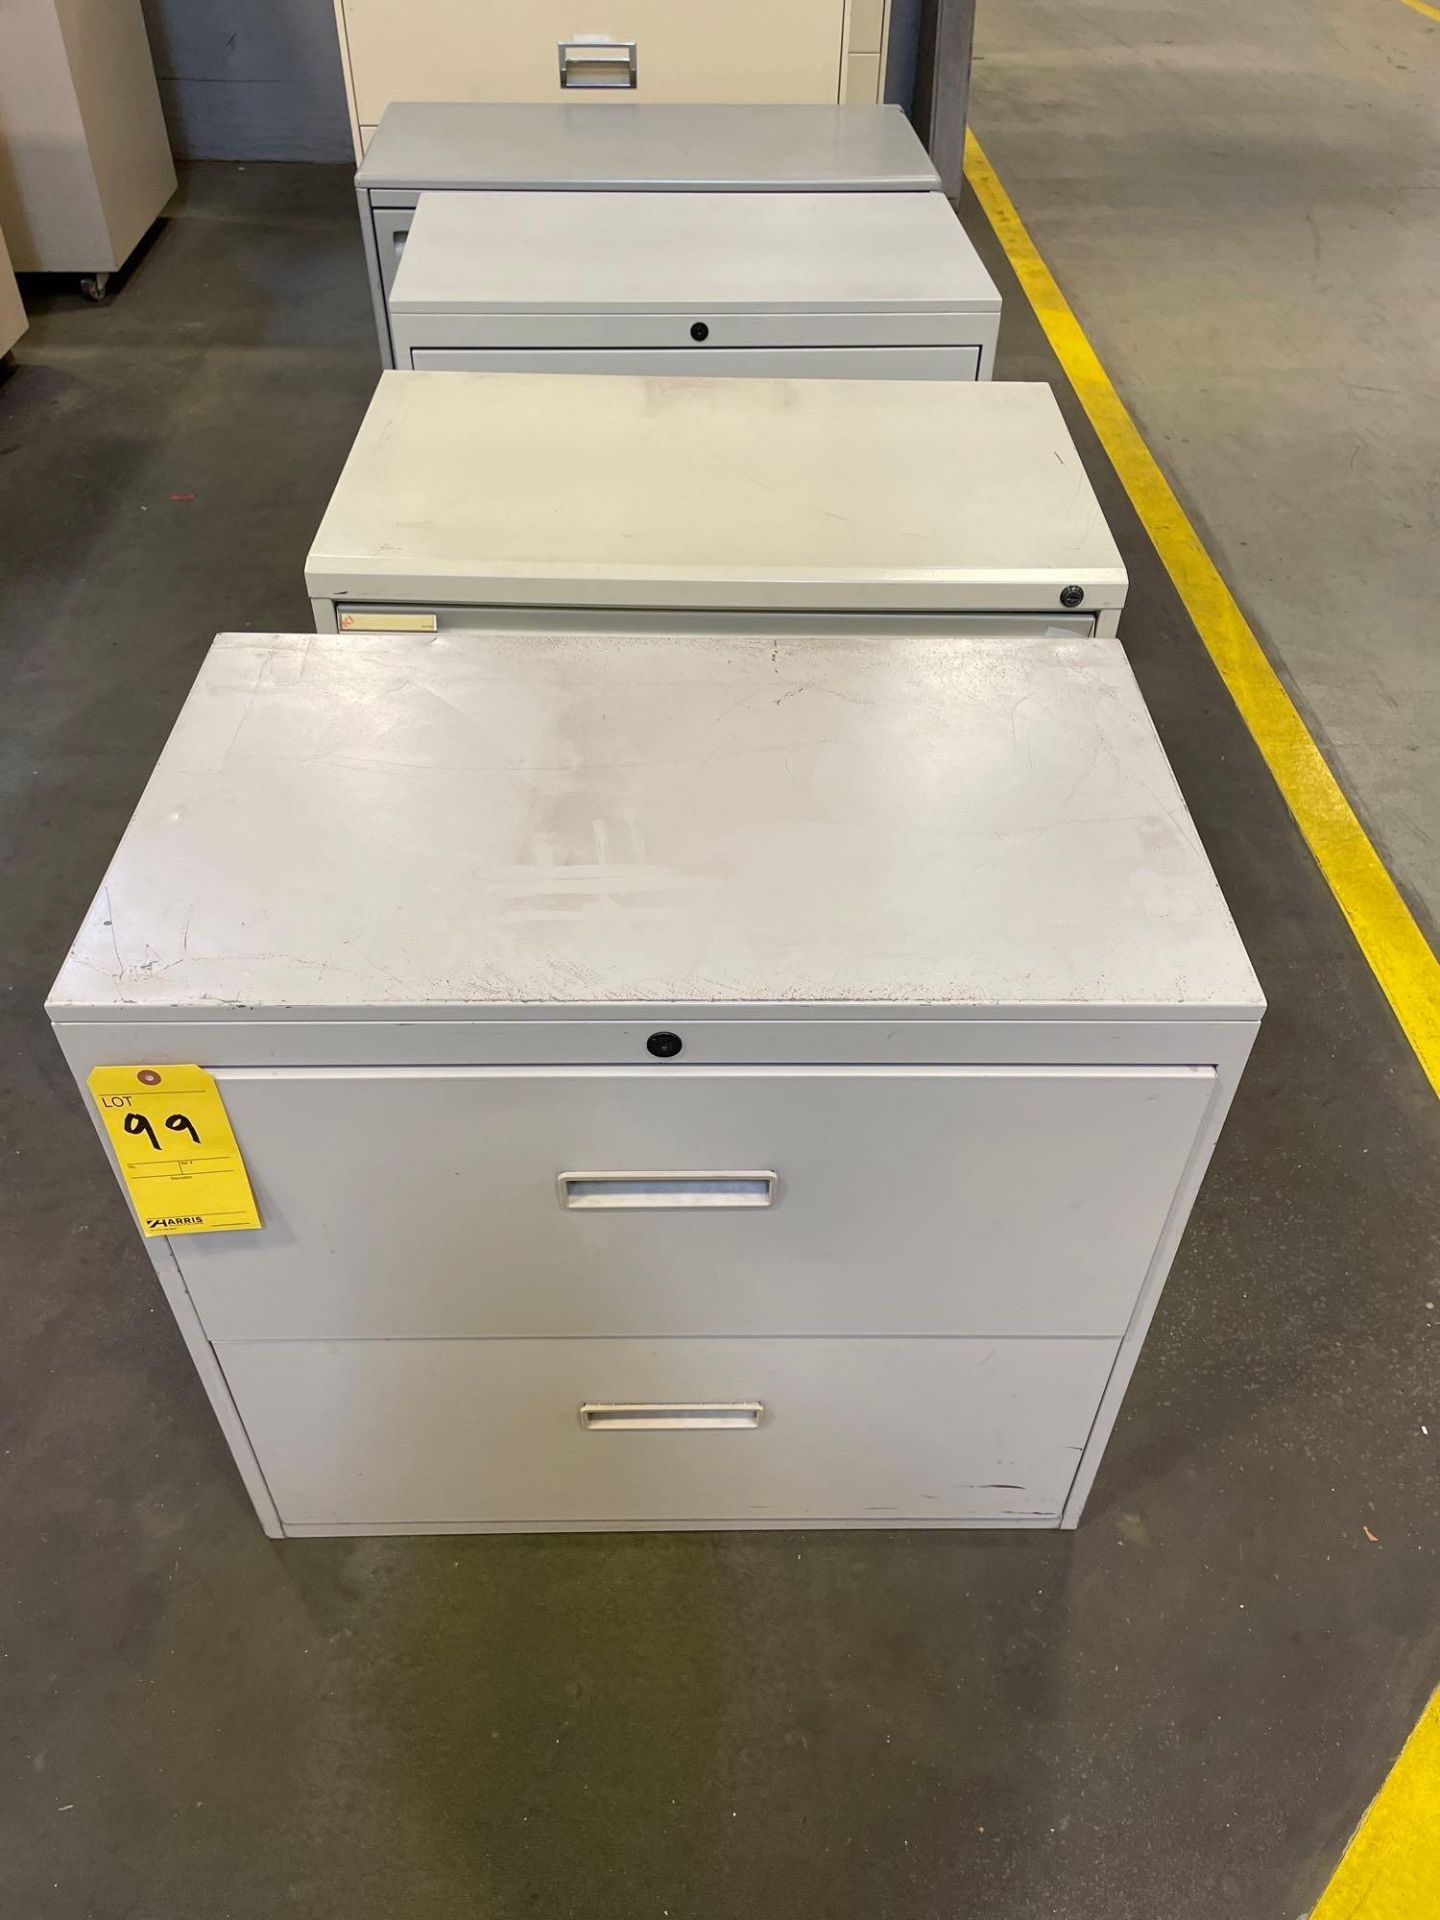 Lot of 4 2-Drawer File Cabinets: (3) 30" X 17 1/2" X 28", (1) 36" X 18" X 28" - Image 2 of 4